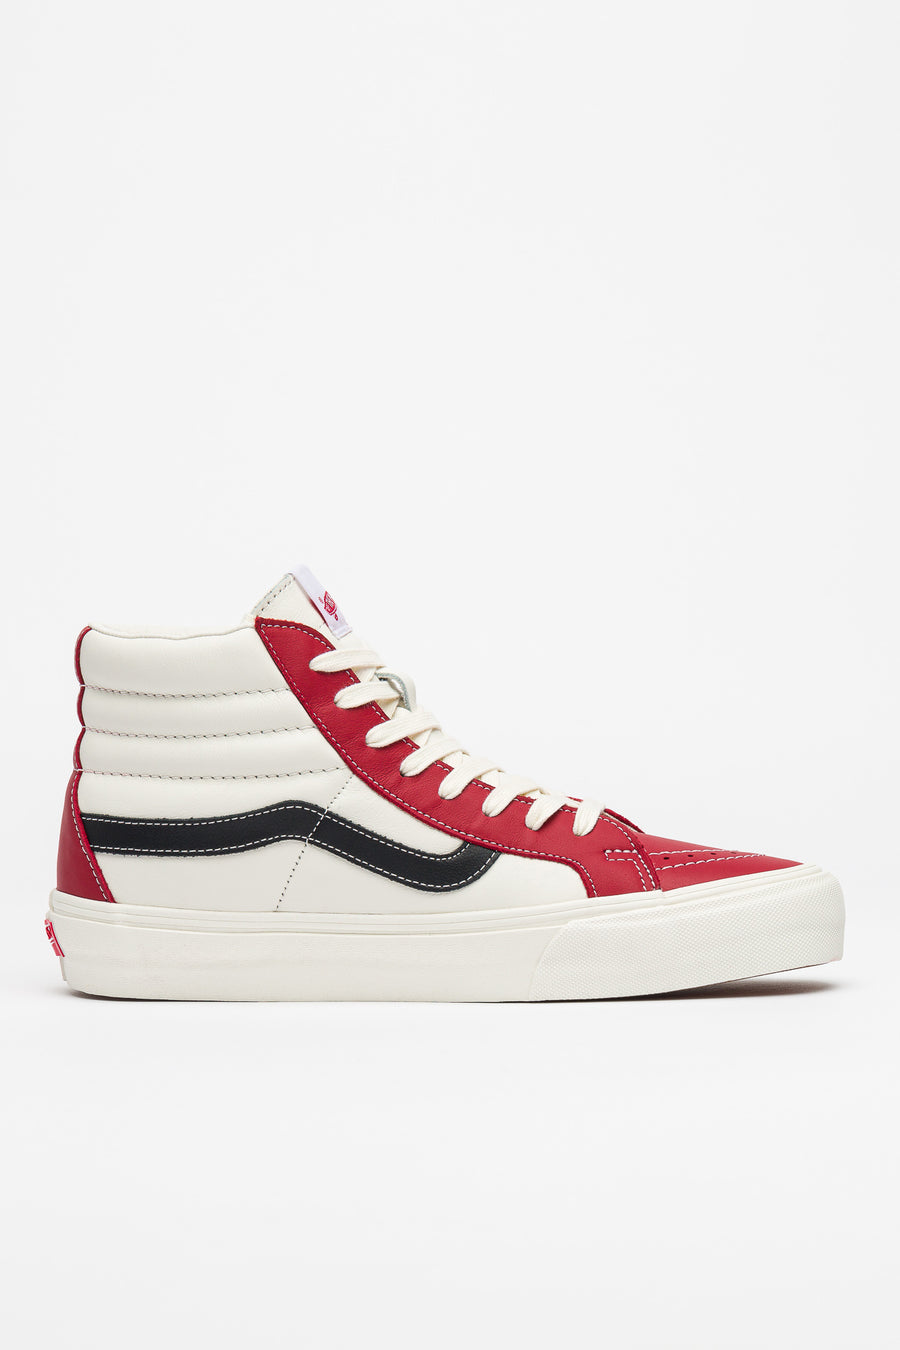 Sk8-Hi Reissue Leather in Chili Pepper/Marshmallow